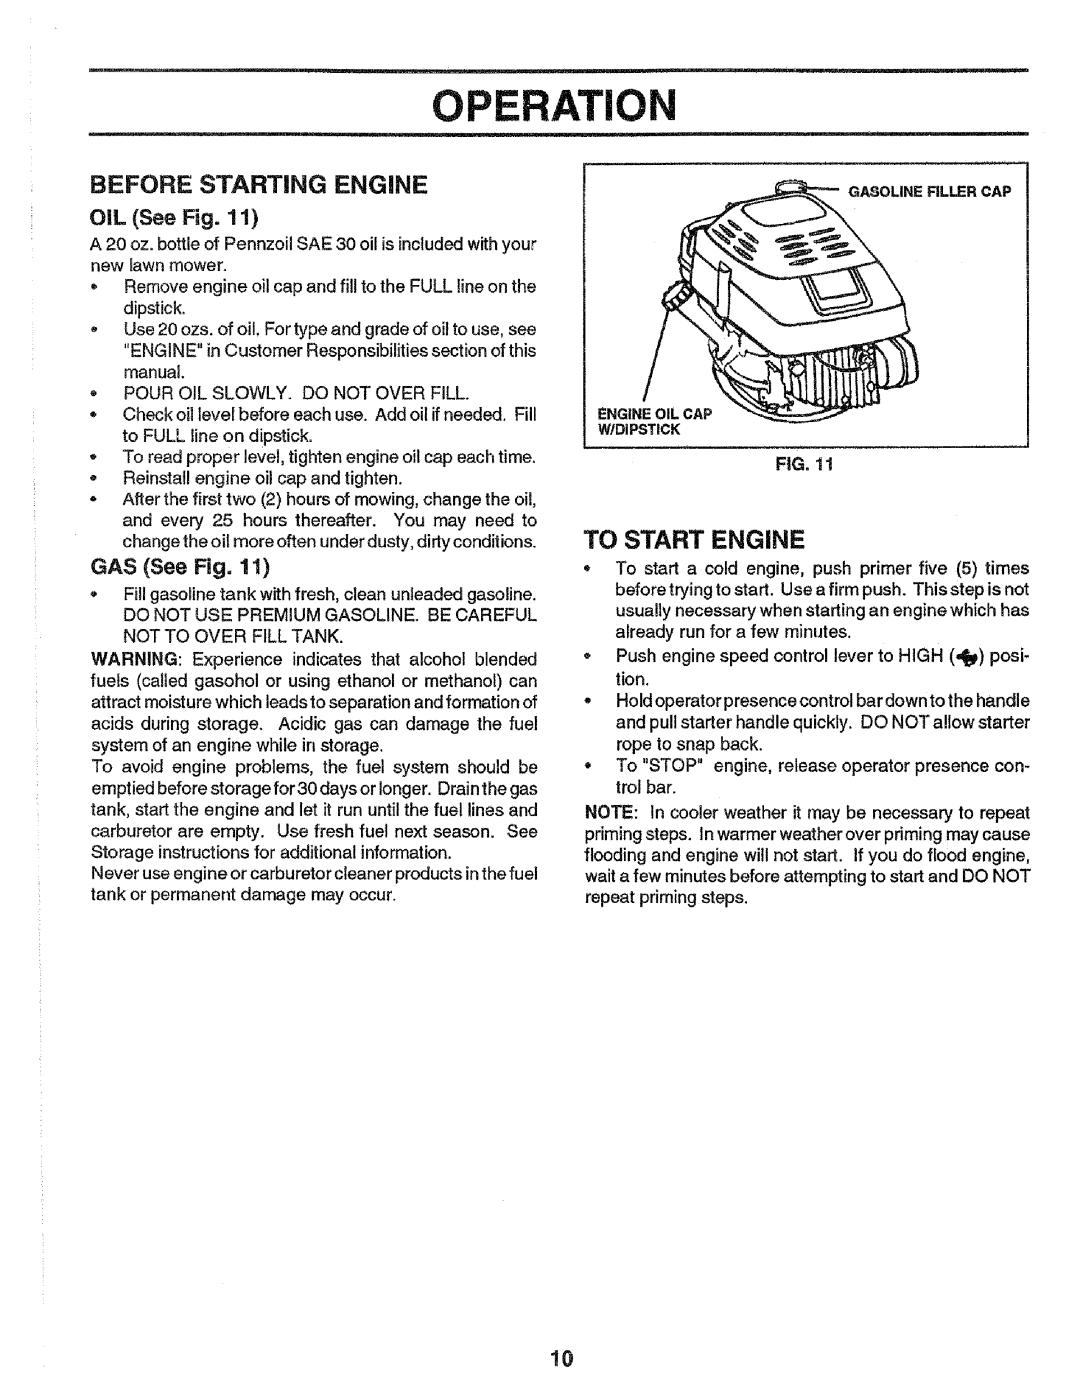 Craftsman 917.37248 owner manual Operation, Before Starting Engine, OIL See Fig, GAS See Fig 